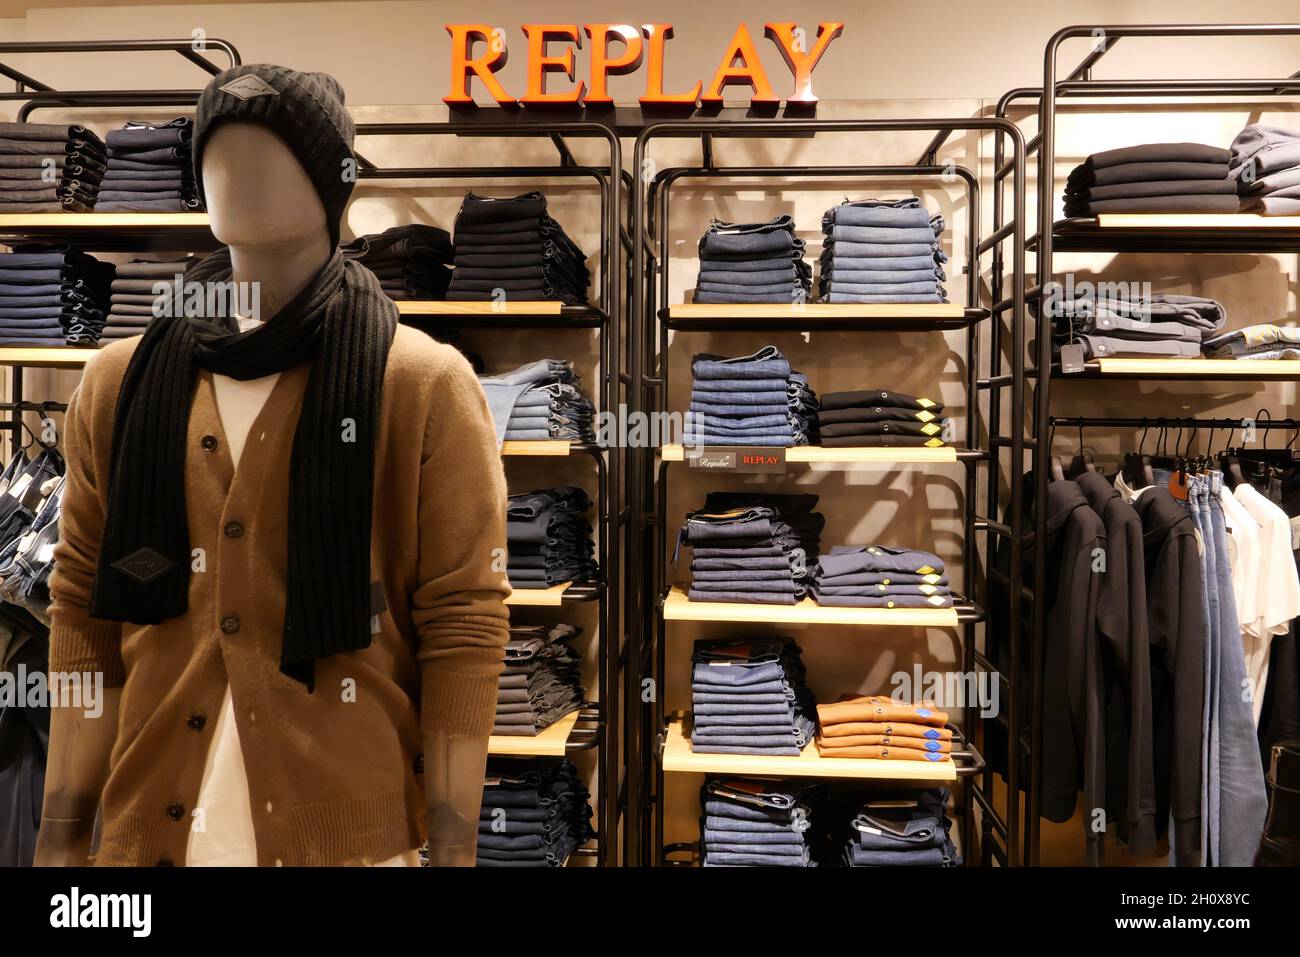 REPLAY CLOTHING ON DISPLAY THE Photo - Alamy